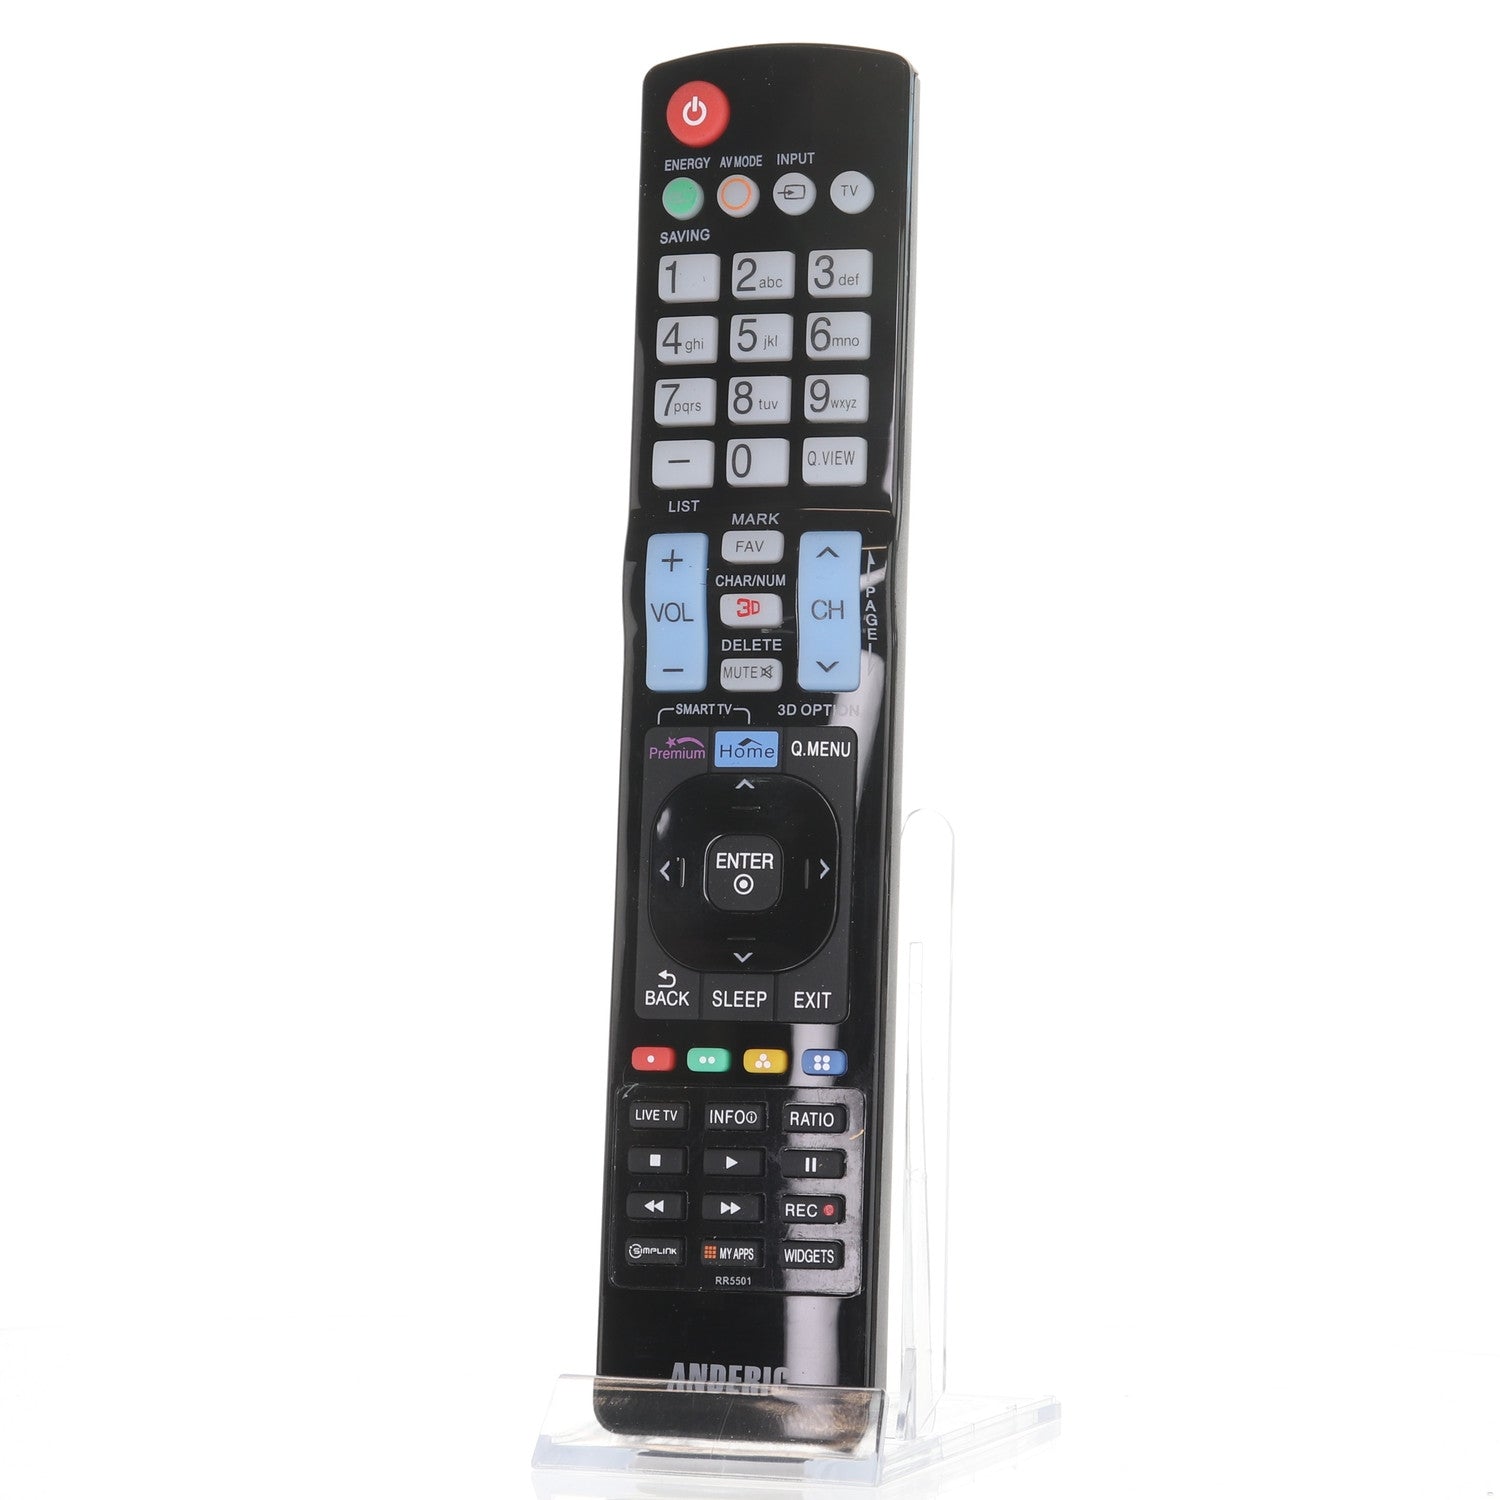 RR5501 Remote Control for LG® TVs